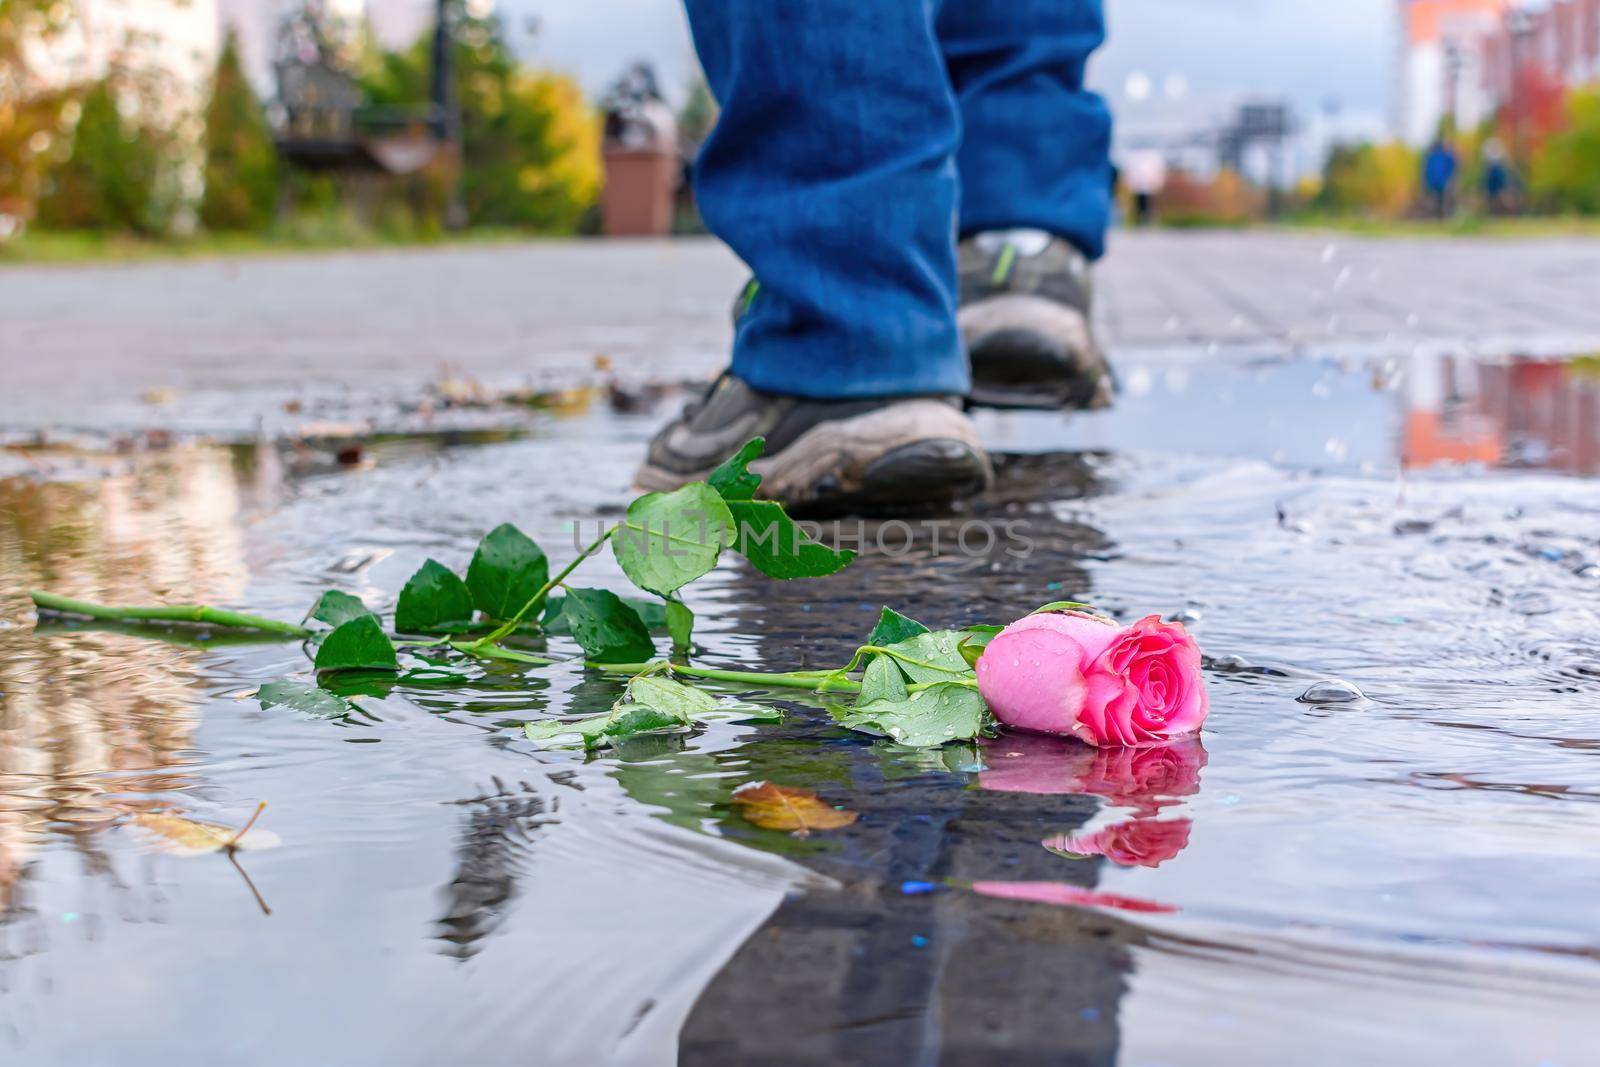 A rose lies in a puddle in autumn against the background of passing people